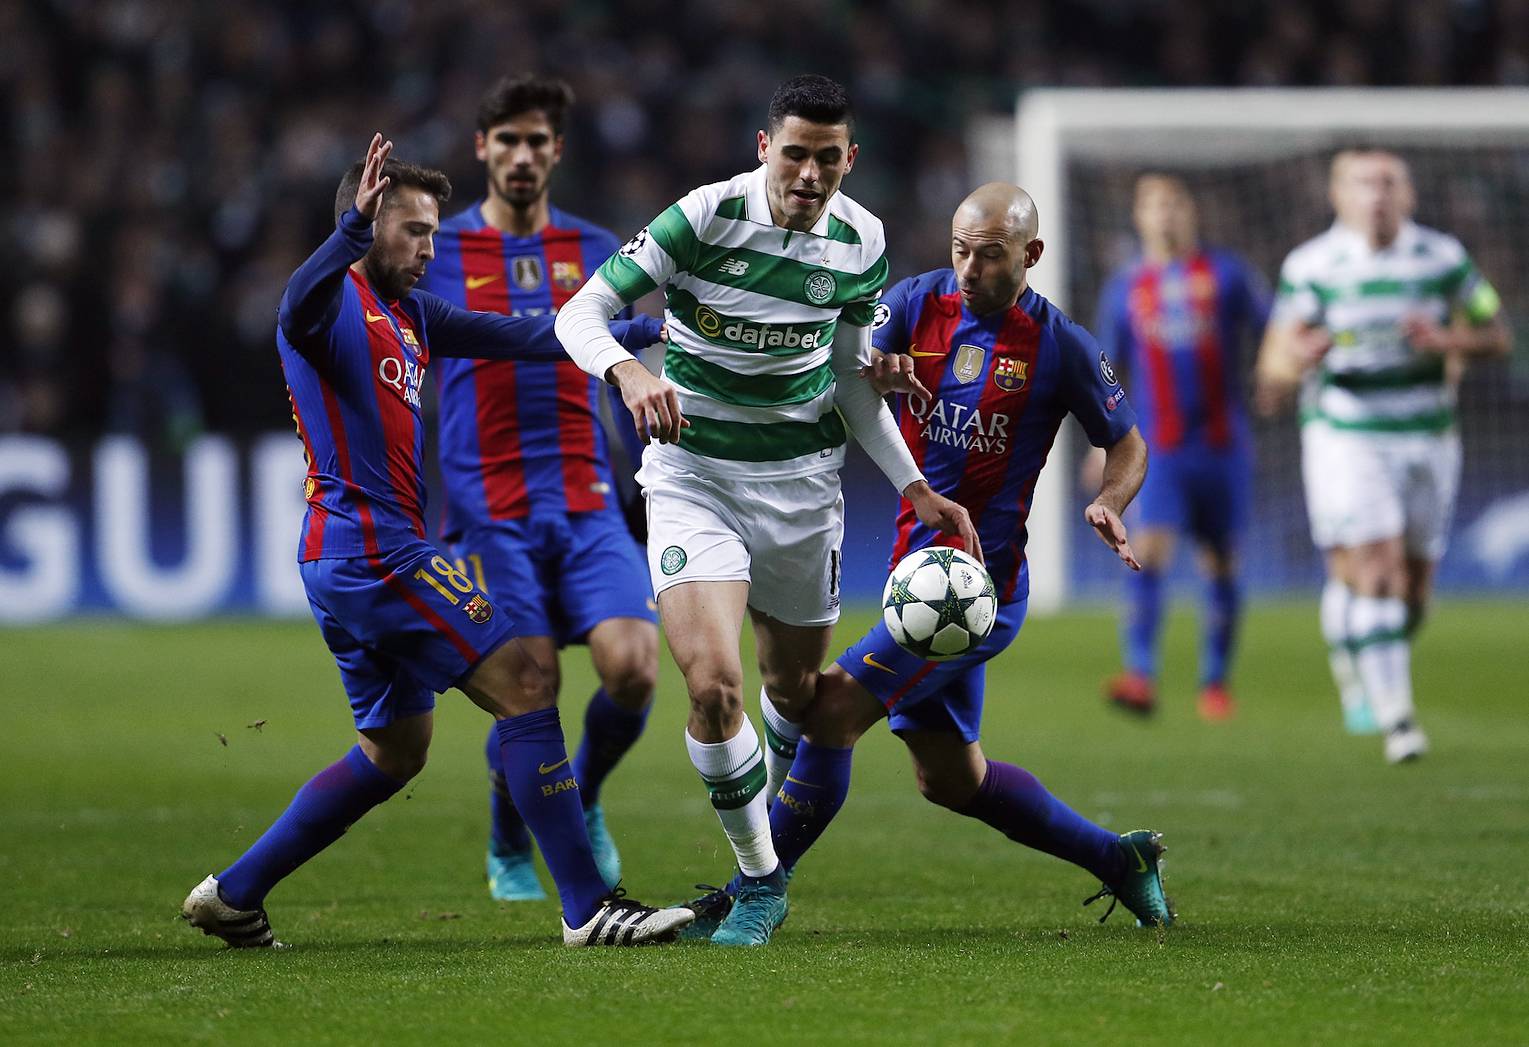 Celtic's Stuart Armstrong in action with Barcelona's Jordi Alba and Javier Mascherano (R)